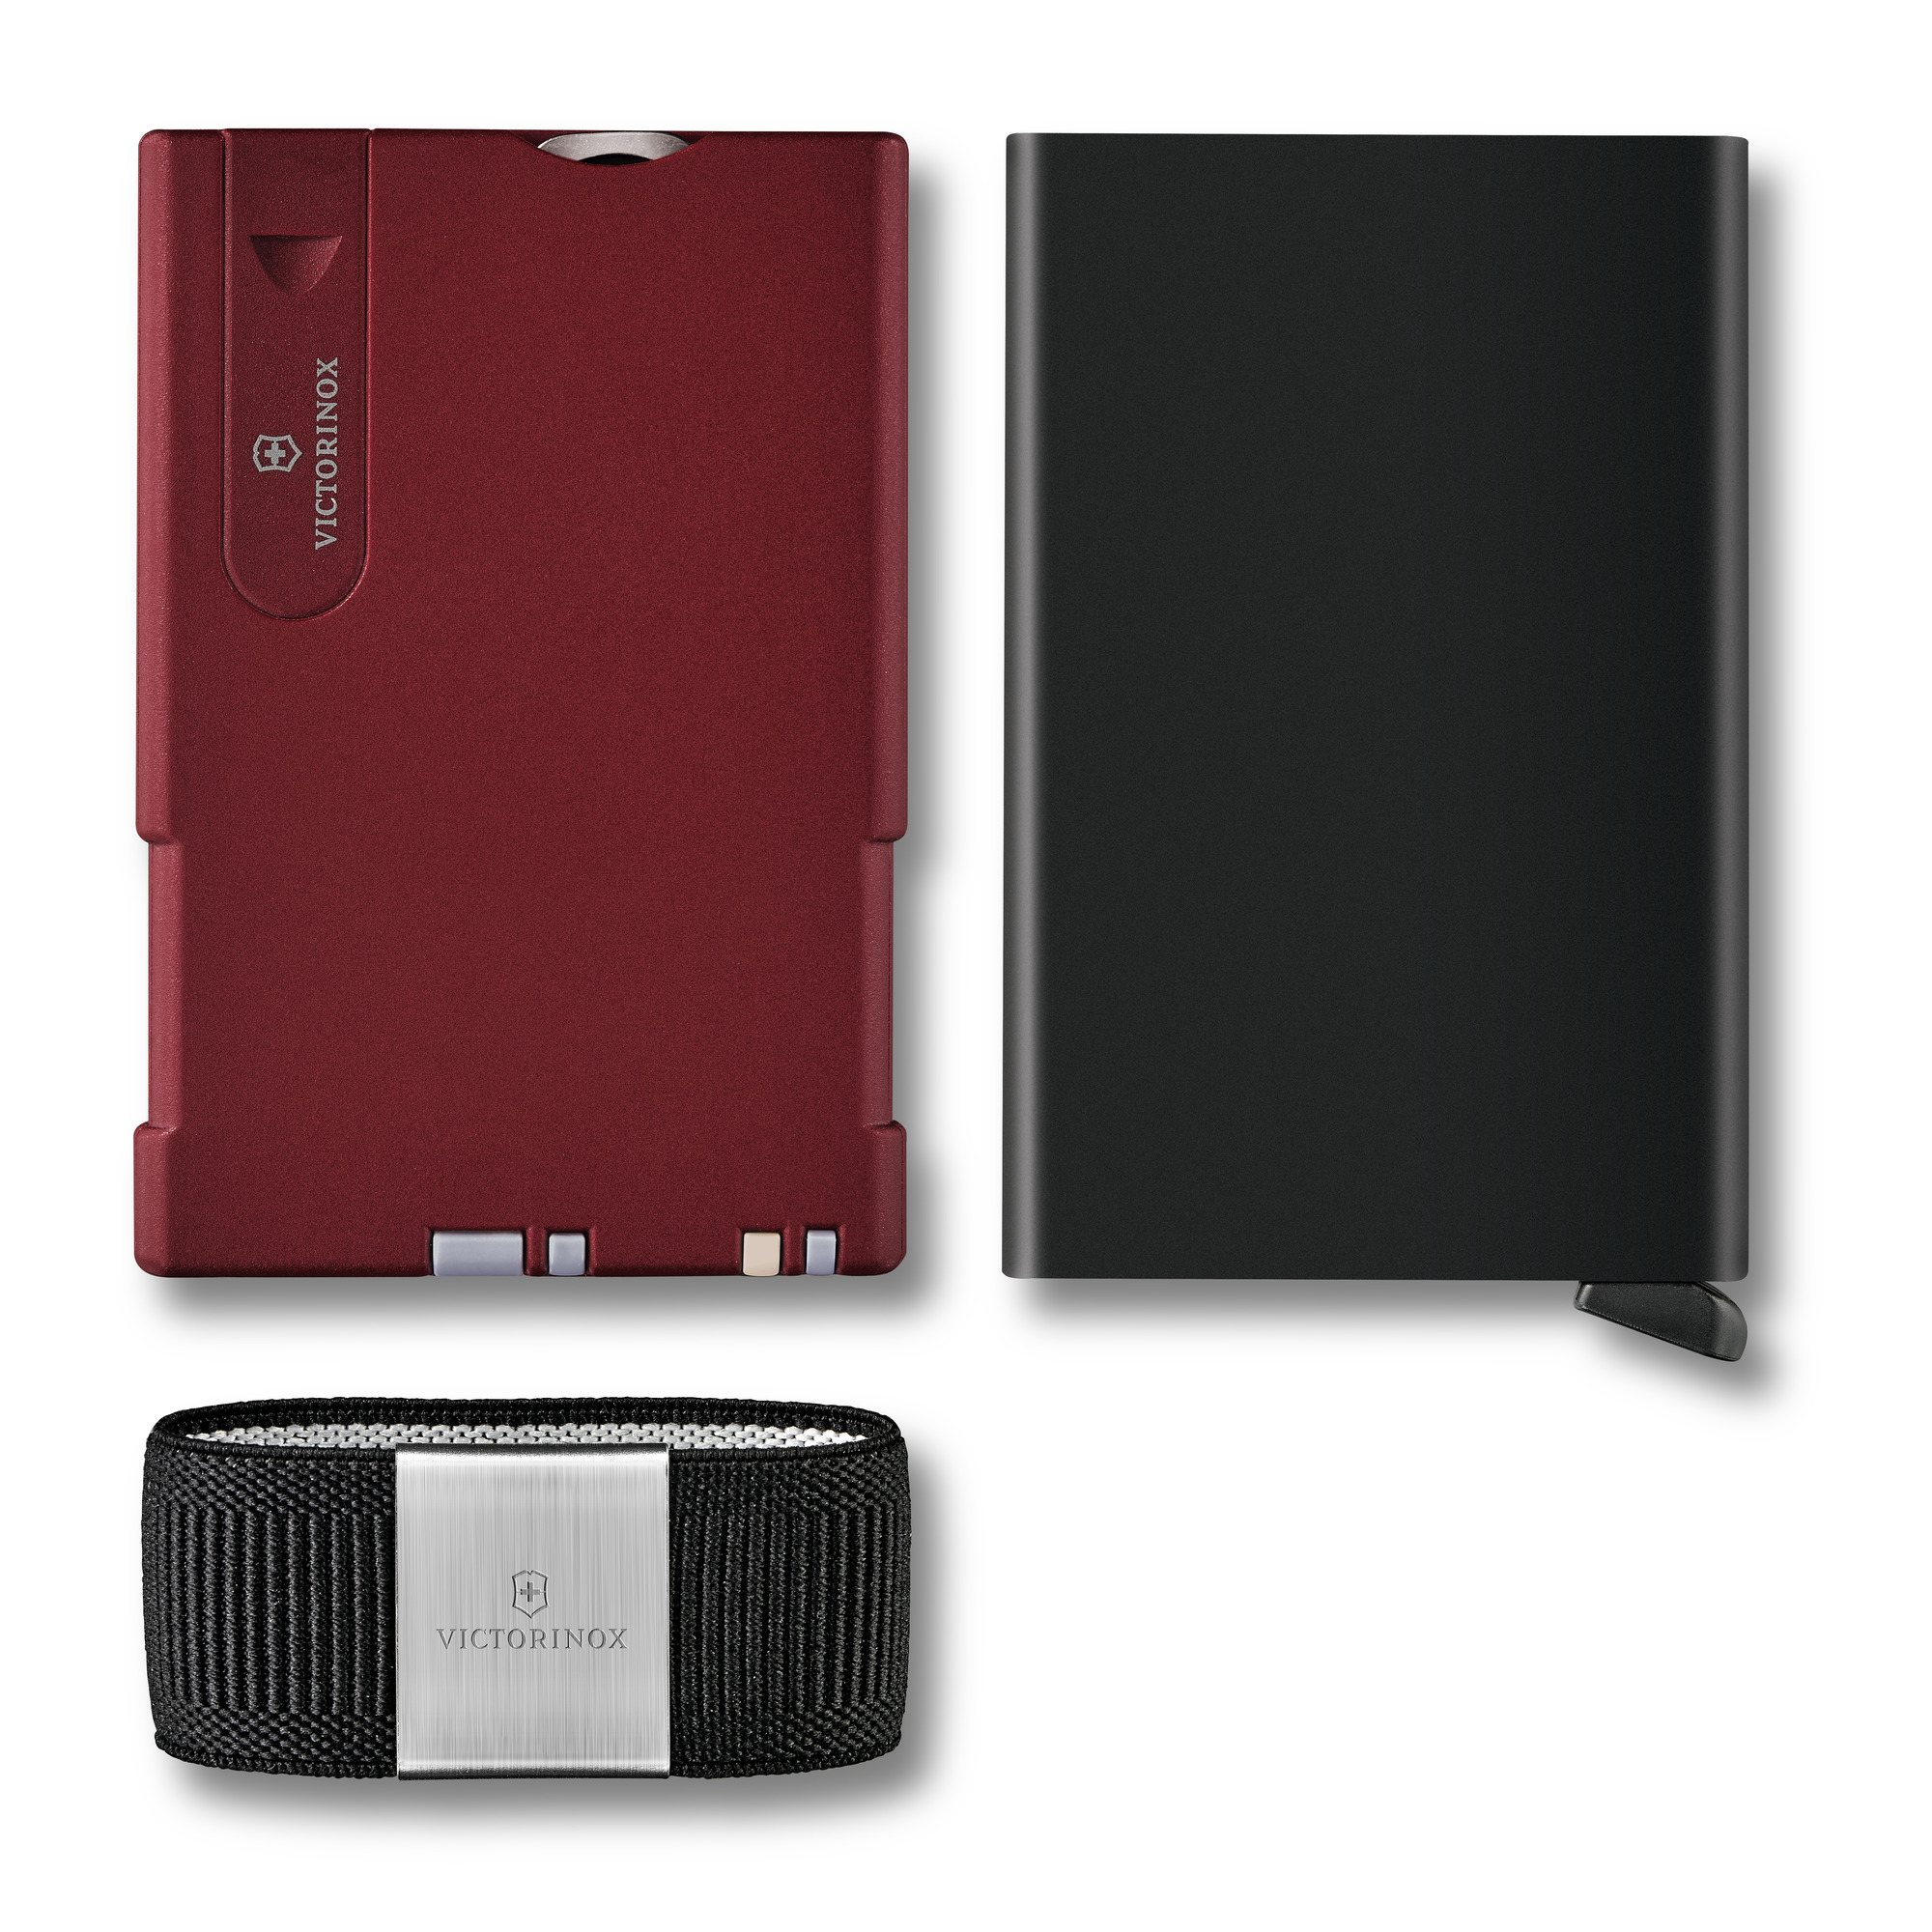 Victorinox Smart Card Wallet, Iconic Red